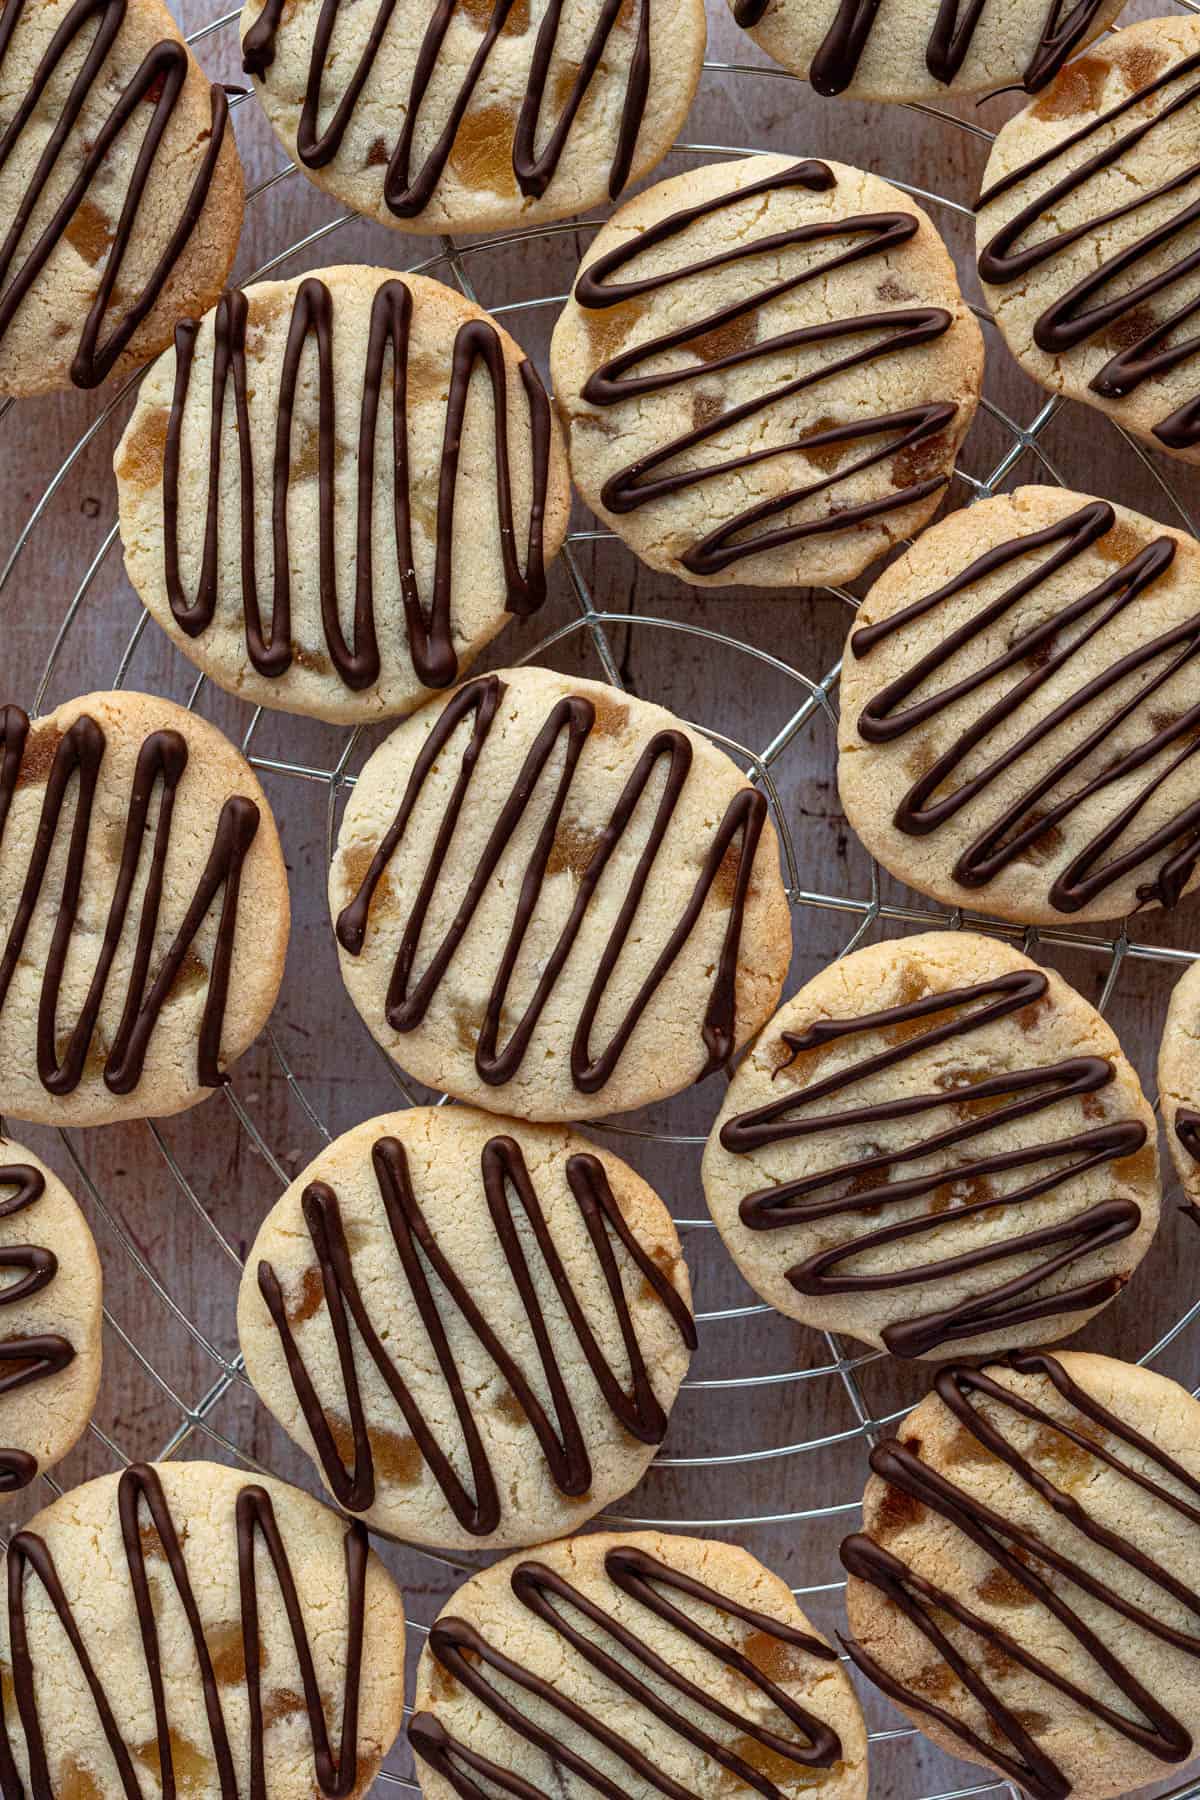 Ginger shortbread cookies ona wire cooling rack.